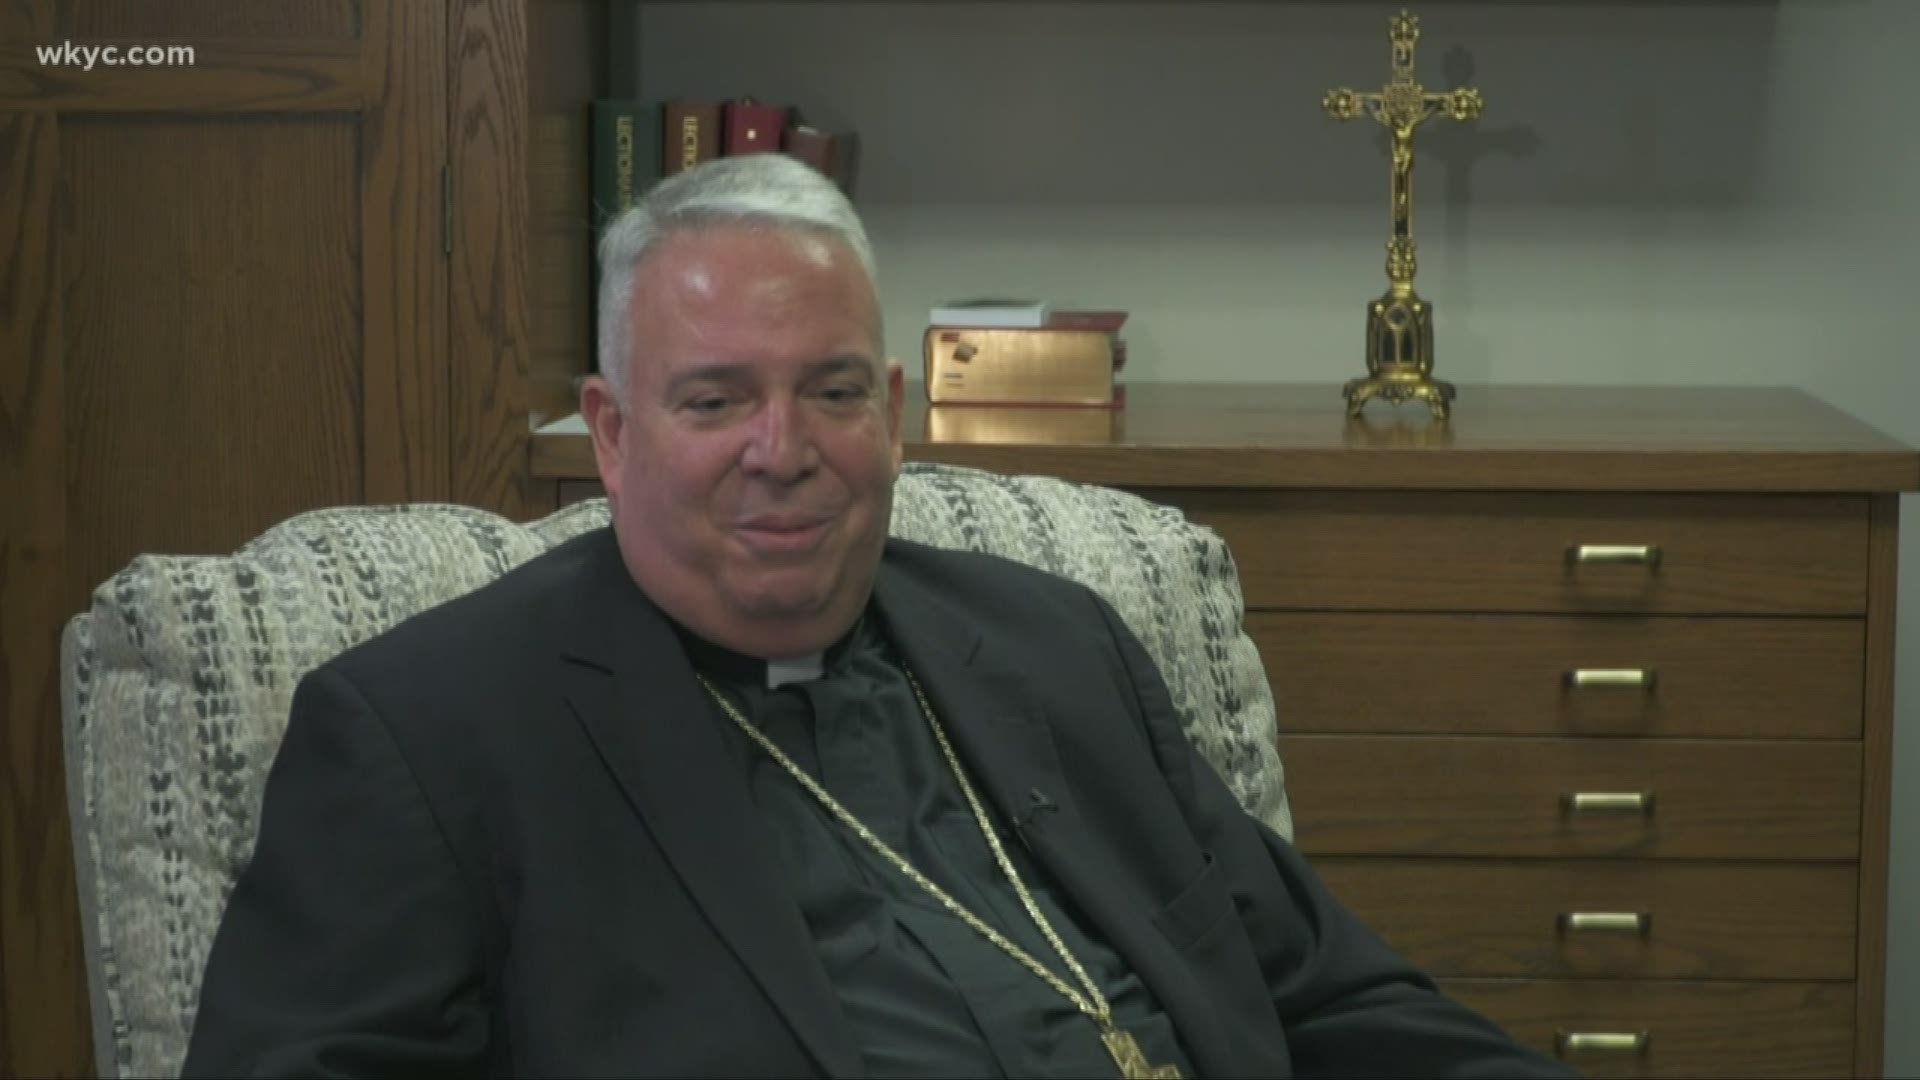 This week marks the end of a short chapter for NEO Catholics. Bishop Nelson Perez is leaving to become archbishop of the archdiocese of Philadelphia.